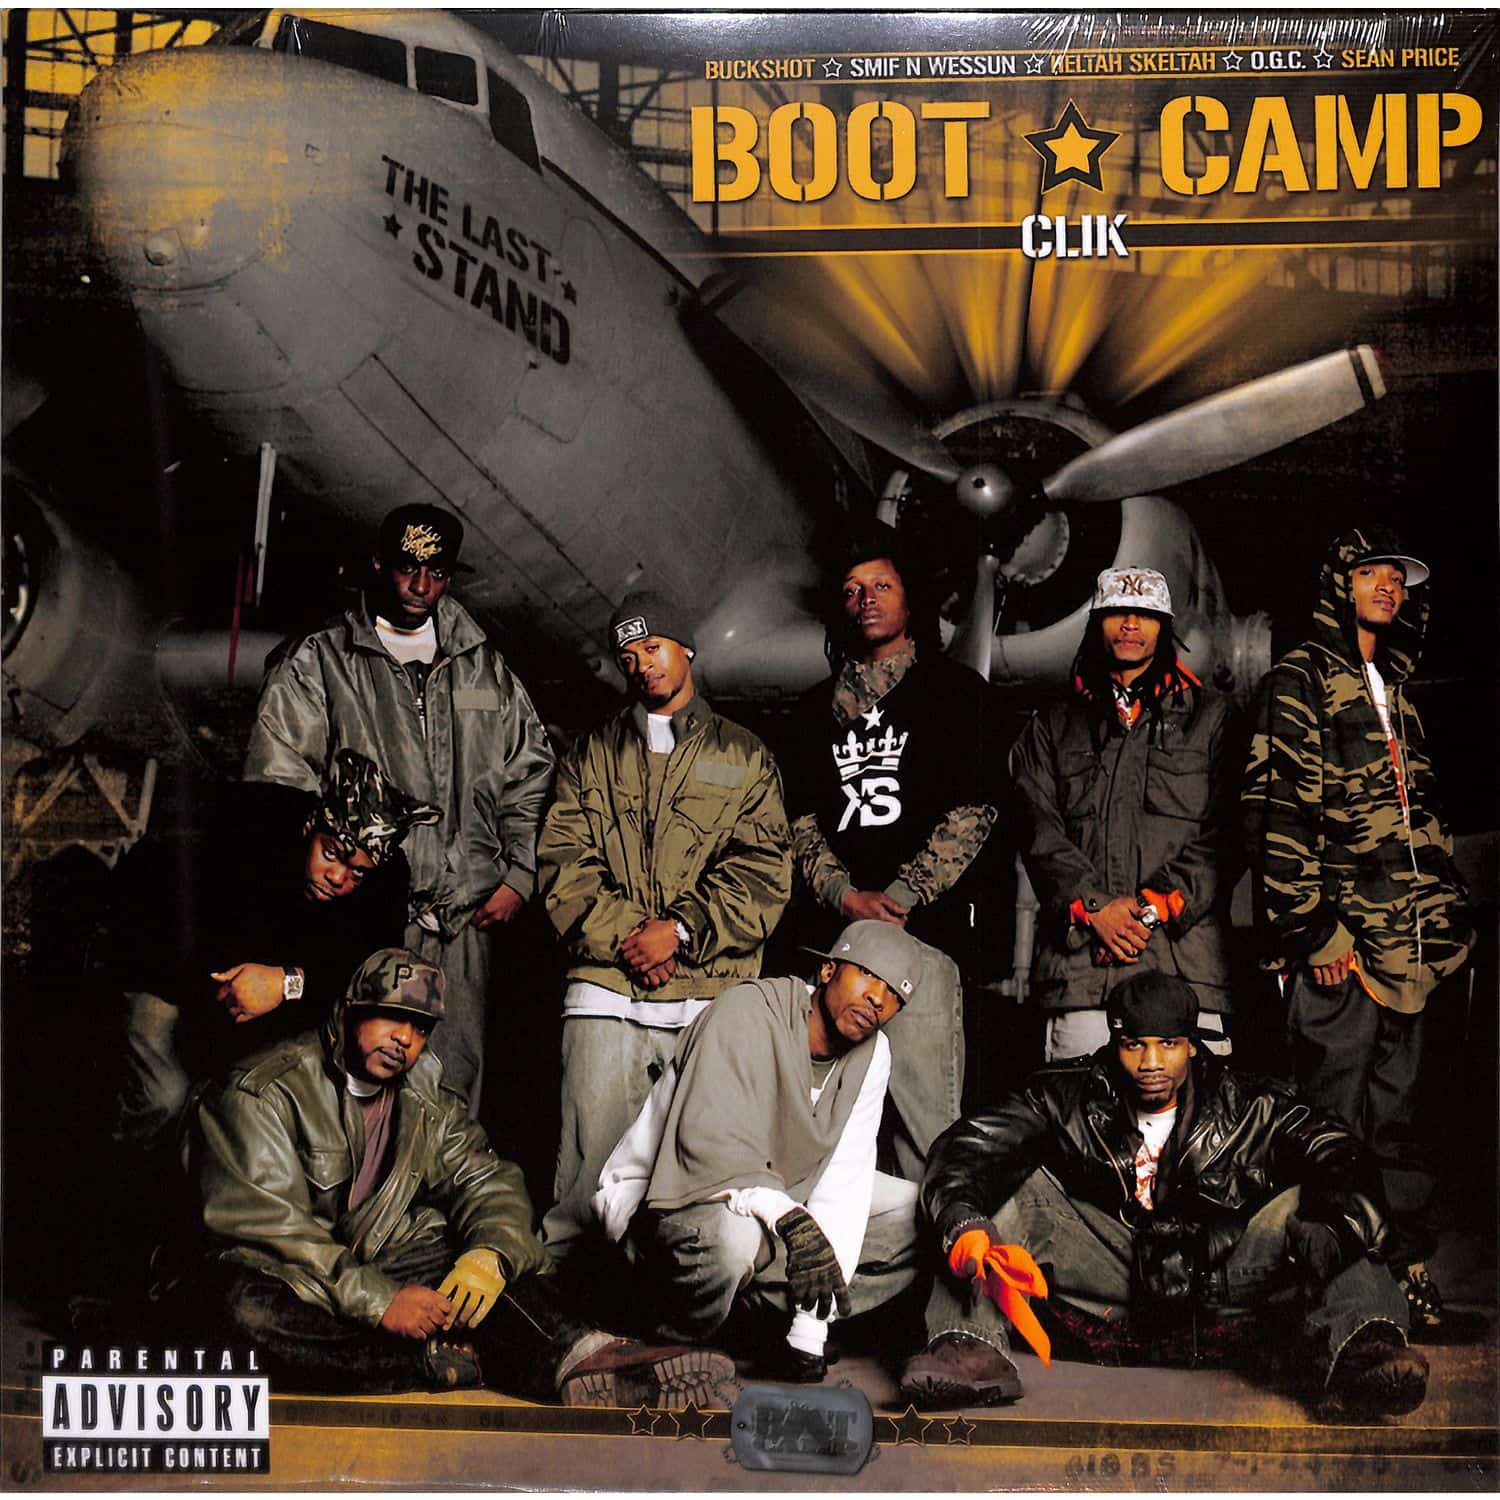 Boot Camp Clik - THE LAST STAND 